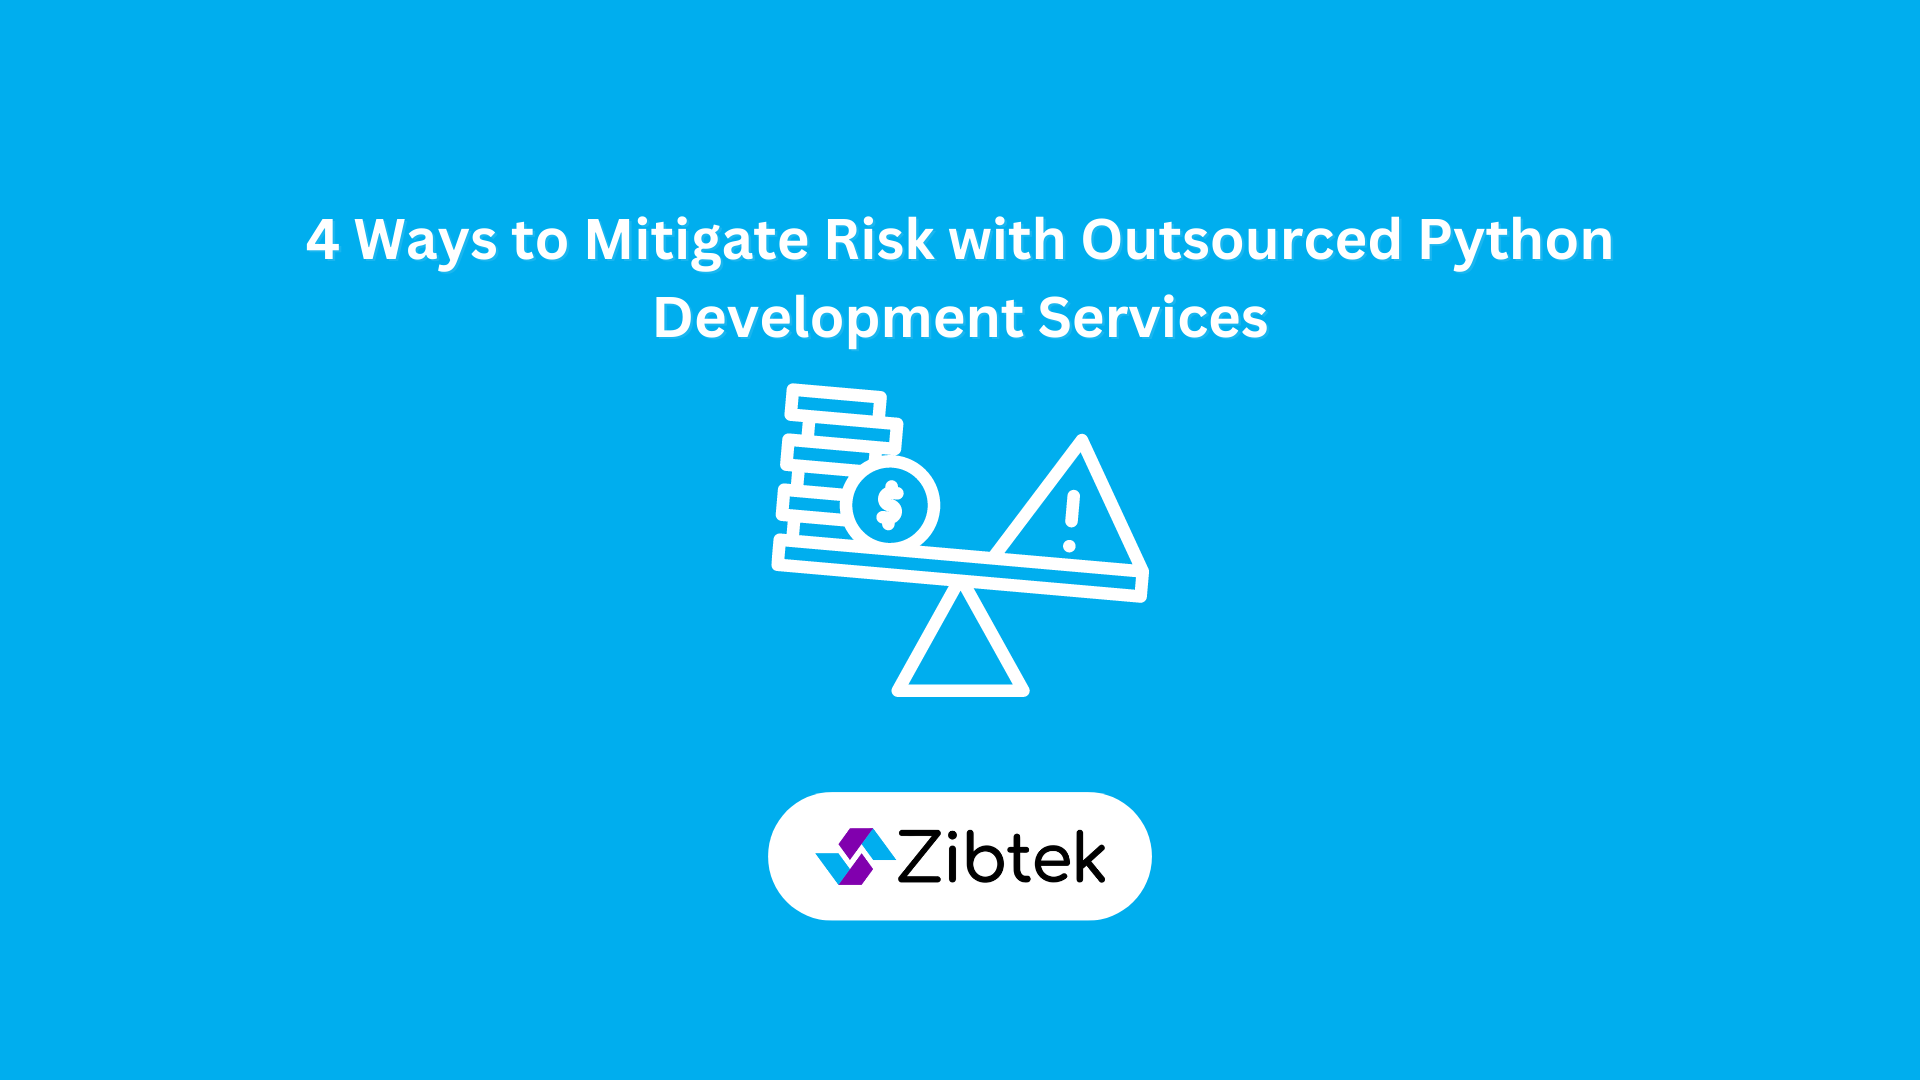 4 Ways to Mitigate Risk with Outsourced Python Development Services